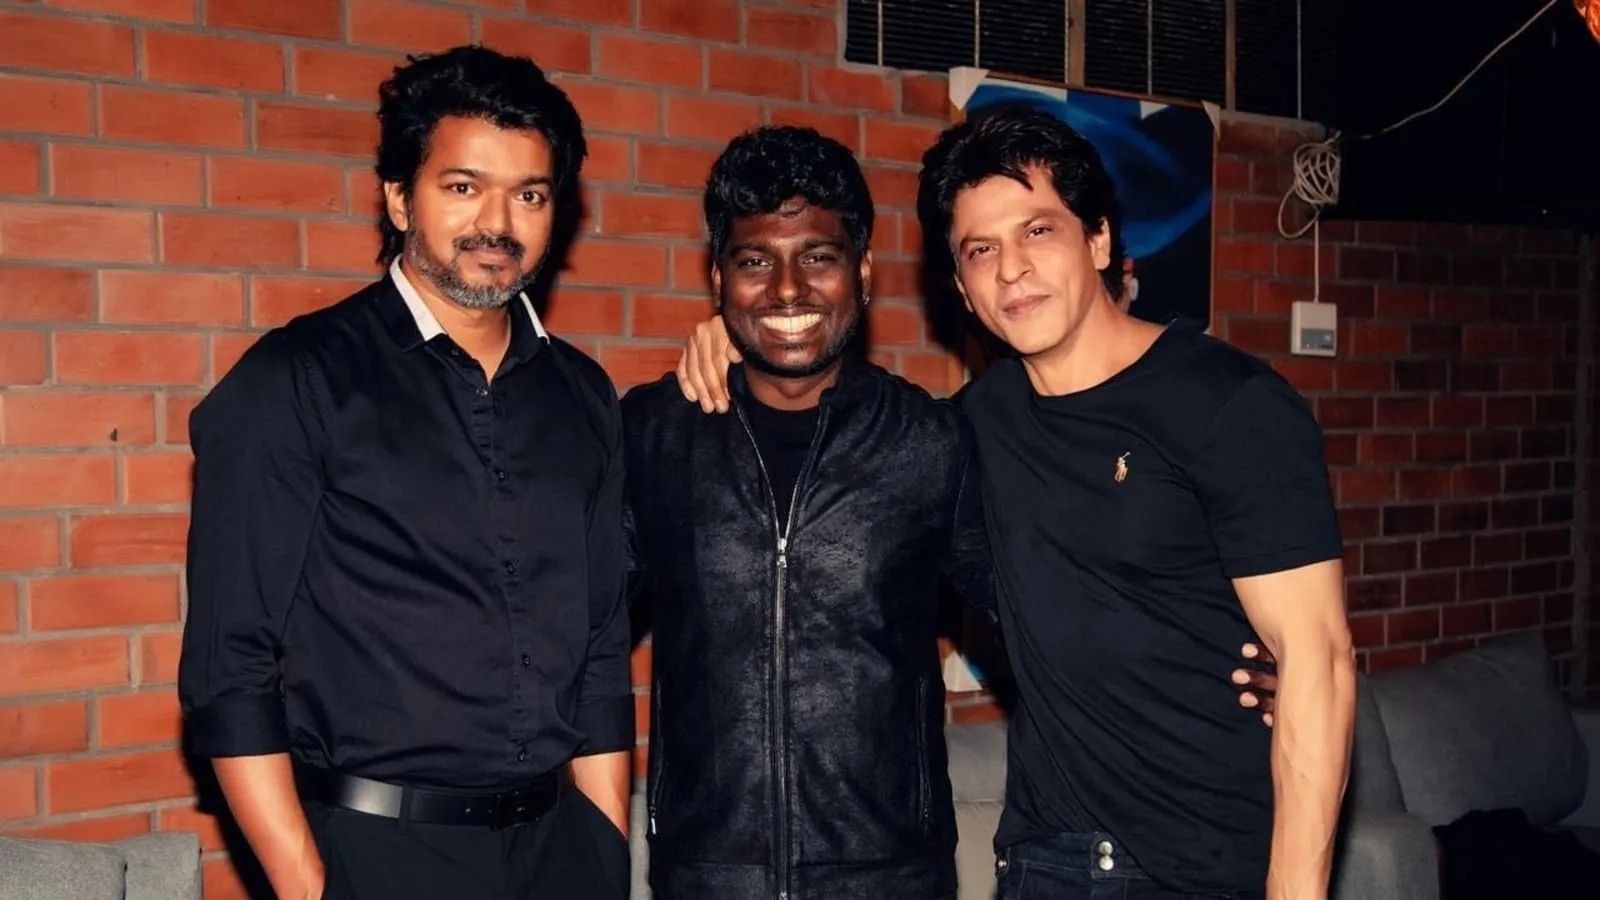 Shah Rukh Khan and Vijay attend Atlee's birthday bash, pose for pic. See  here | Bollywood - Hindustan Times